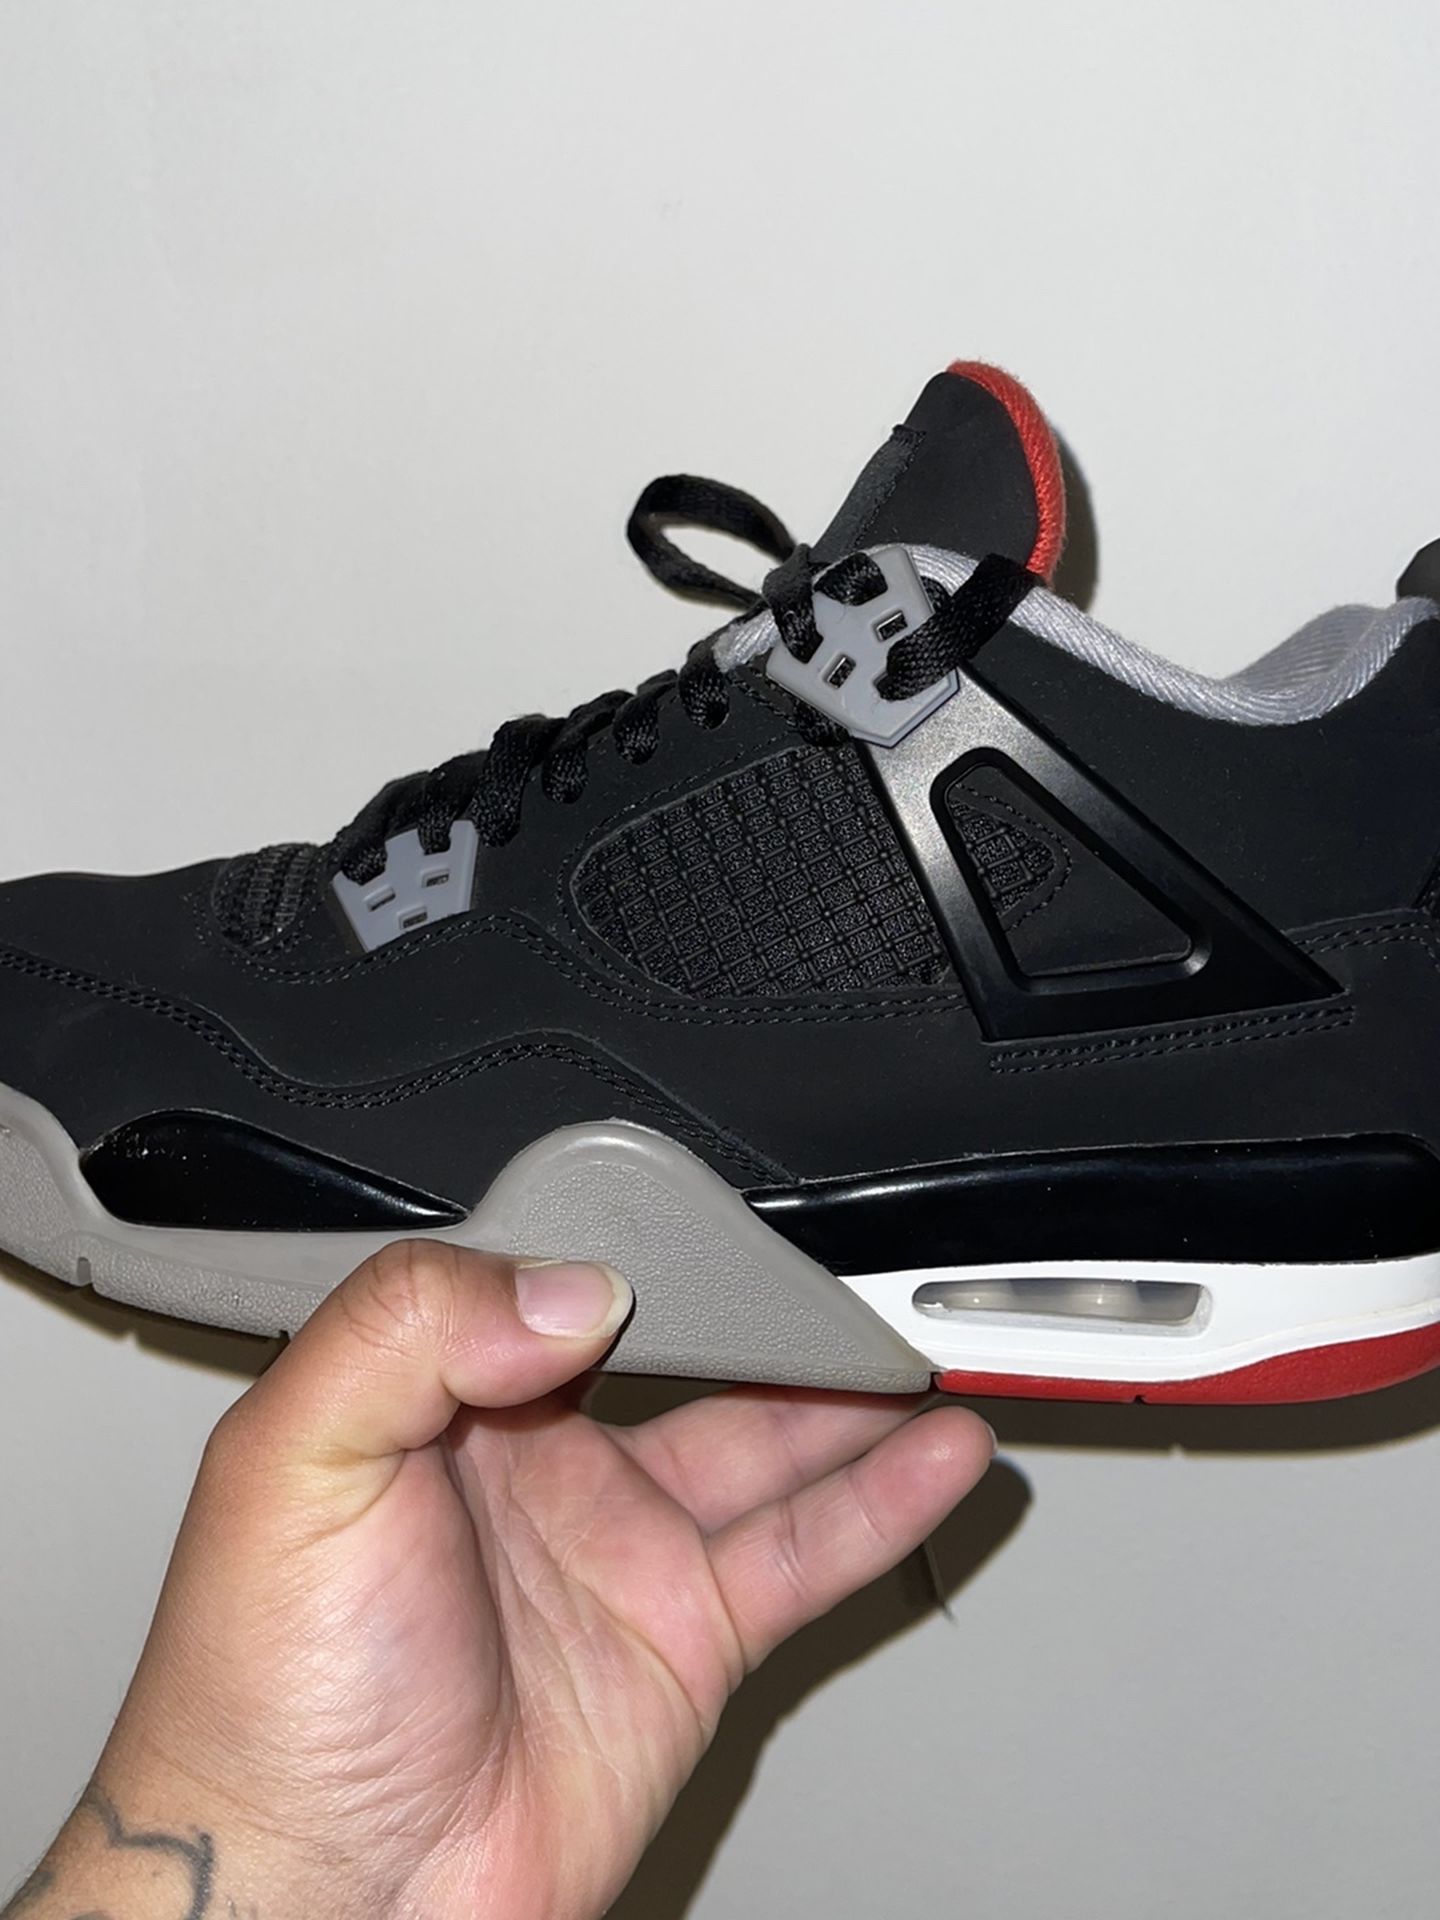 Bred 4s Size 7